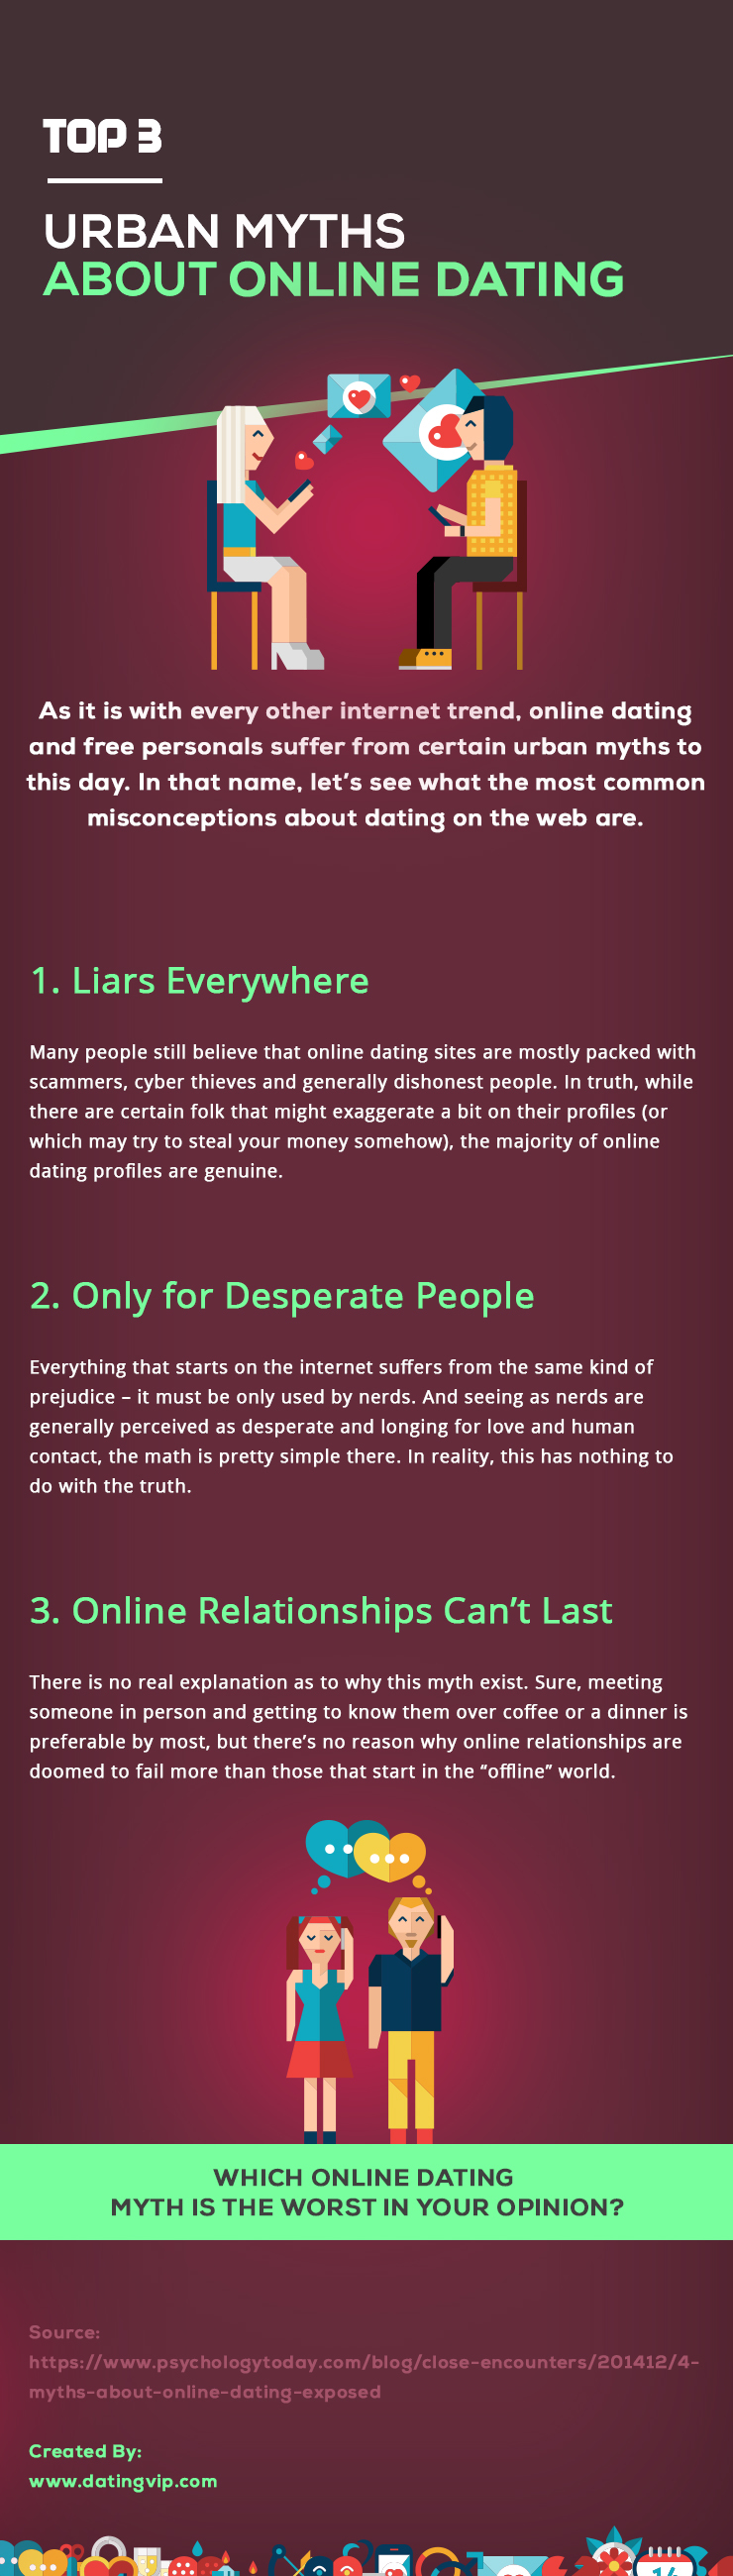 Top 3 Urban Myths about Online Dating